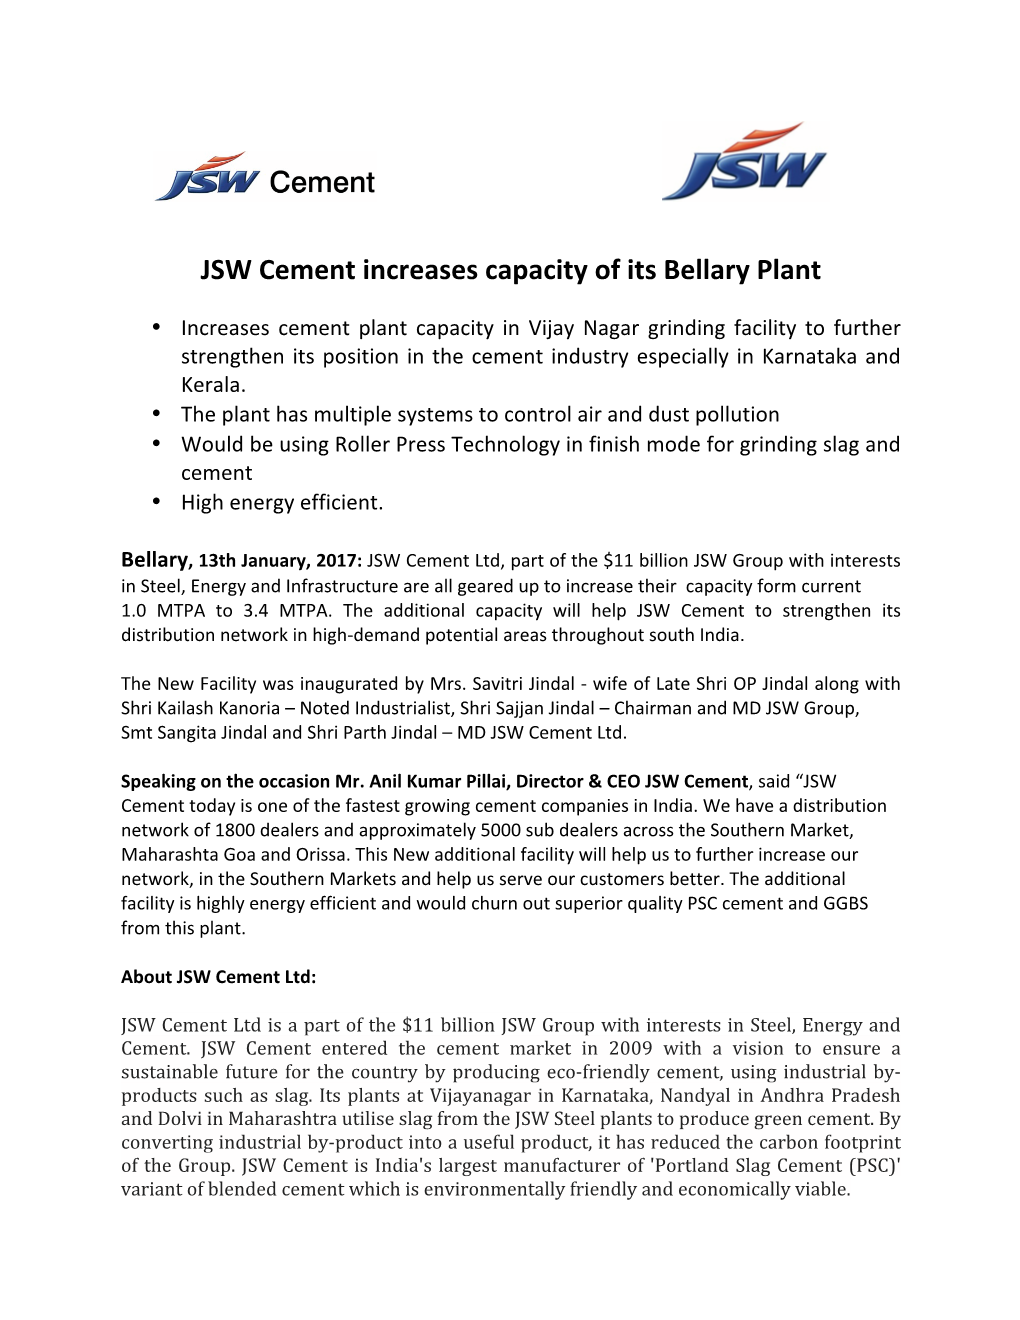 JSW Cement Increases Capacity of Its Bellary Plant